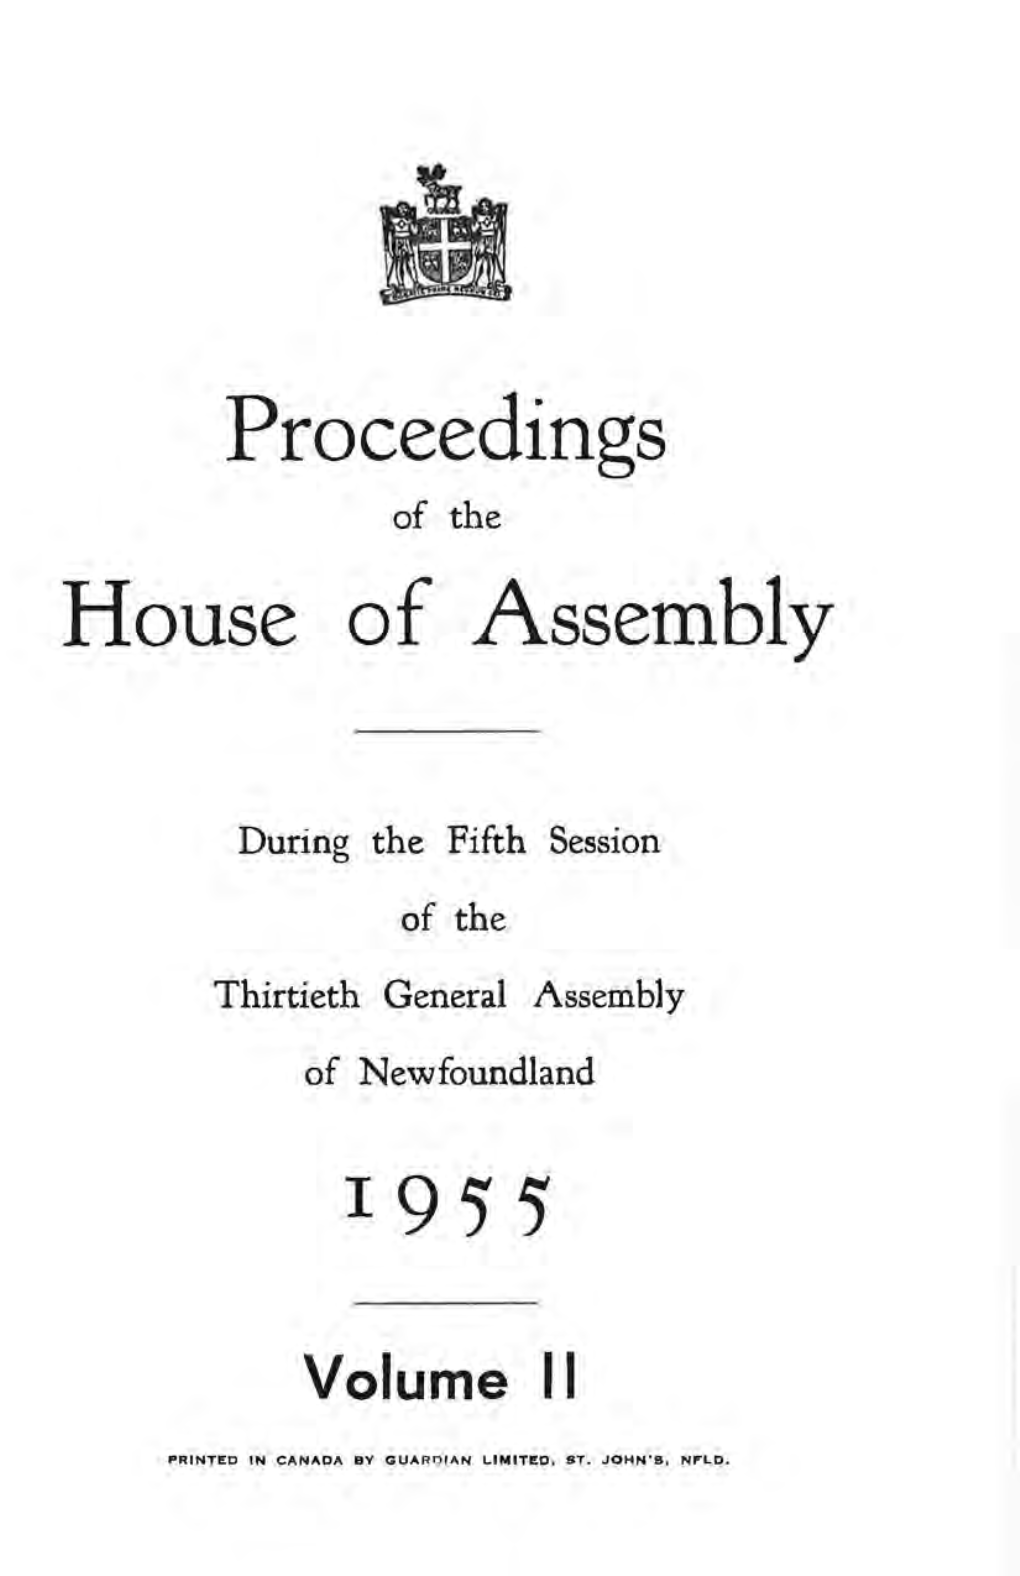 Proceedings House of Assembly 1